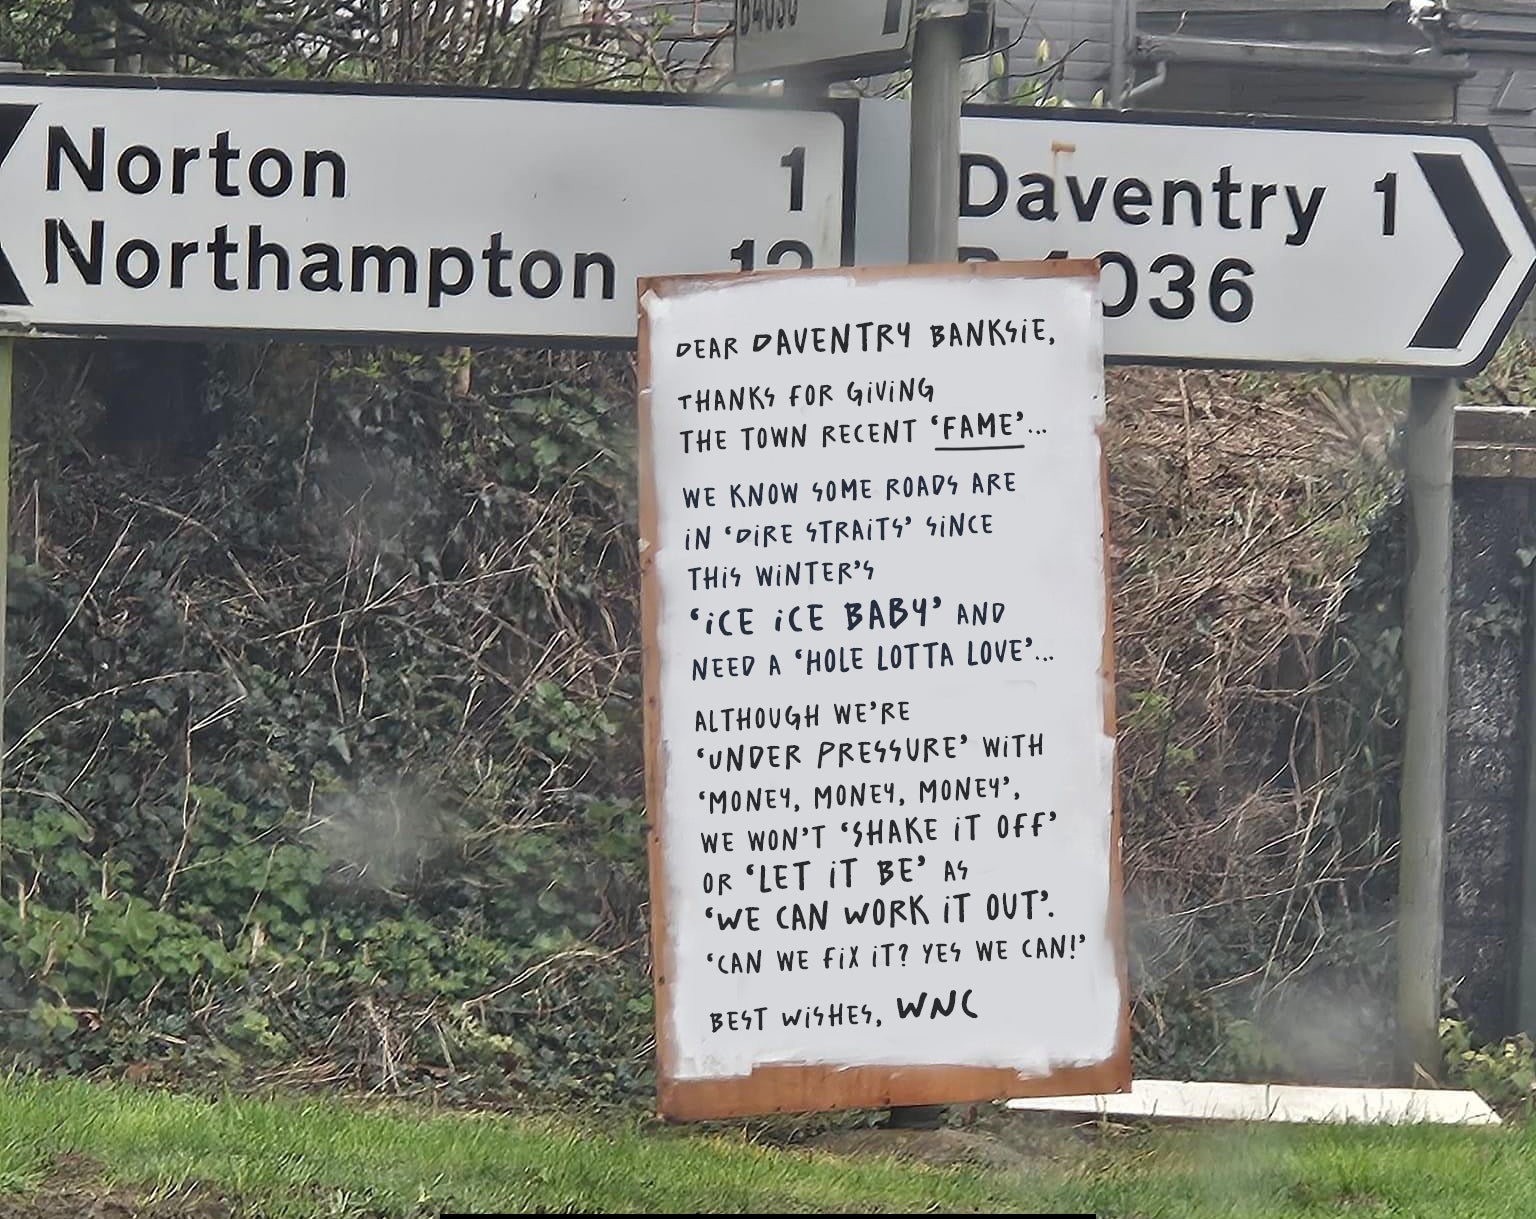 West Northamptonshire Council’s response to Daventry Banksie’s signs